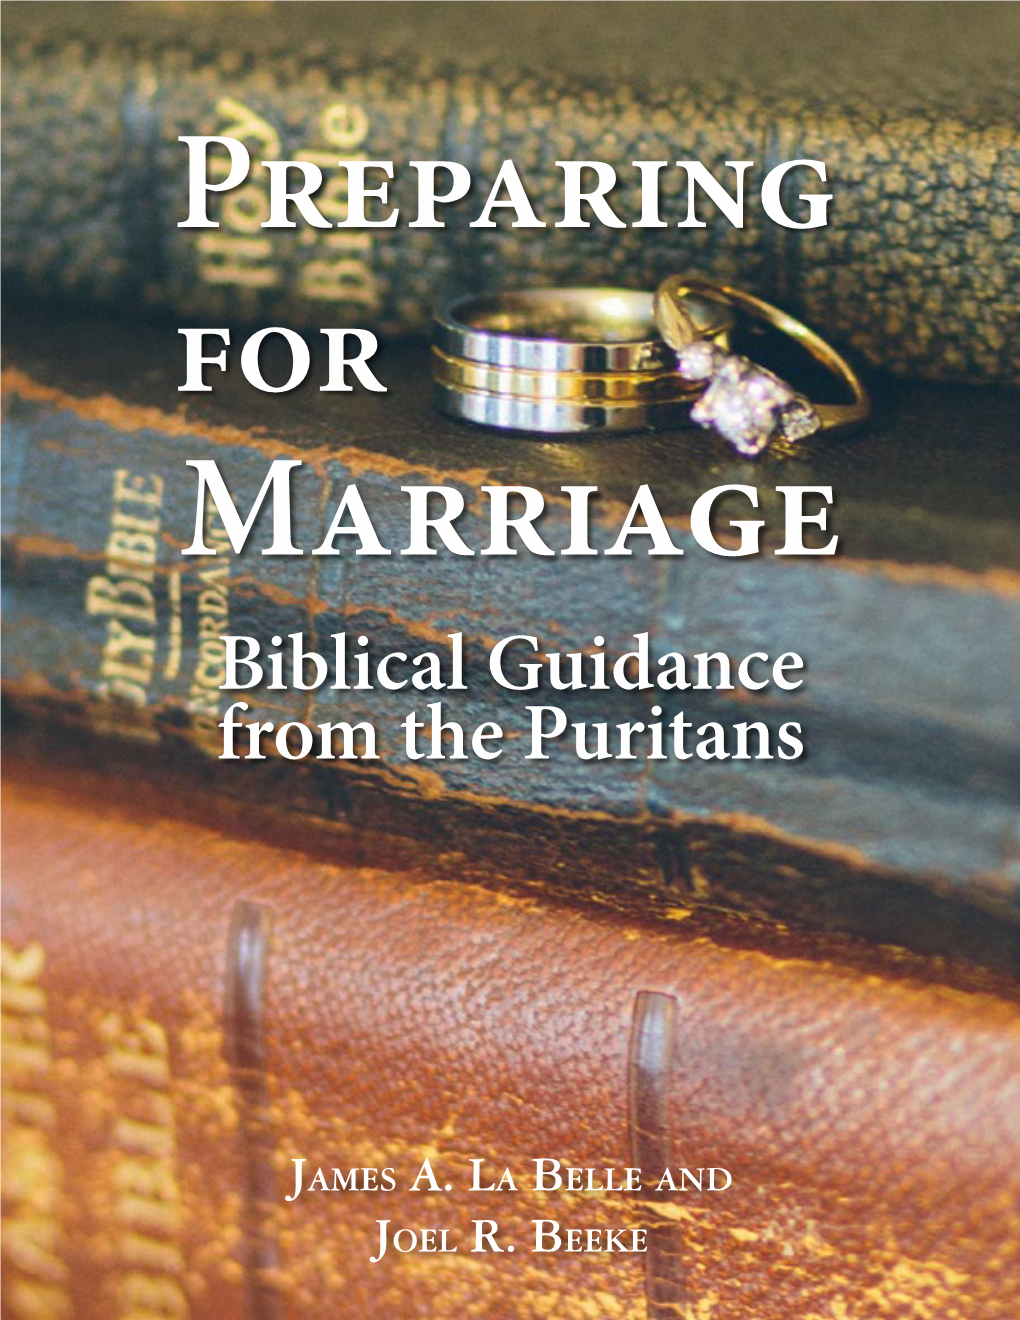 Preparing for Marriage: Biblical Guidance from the Puritans